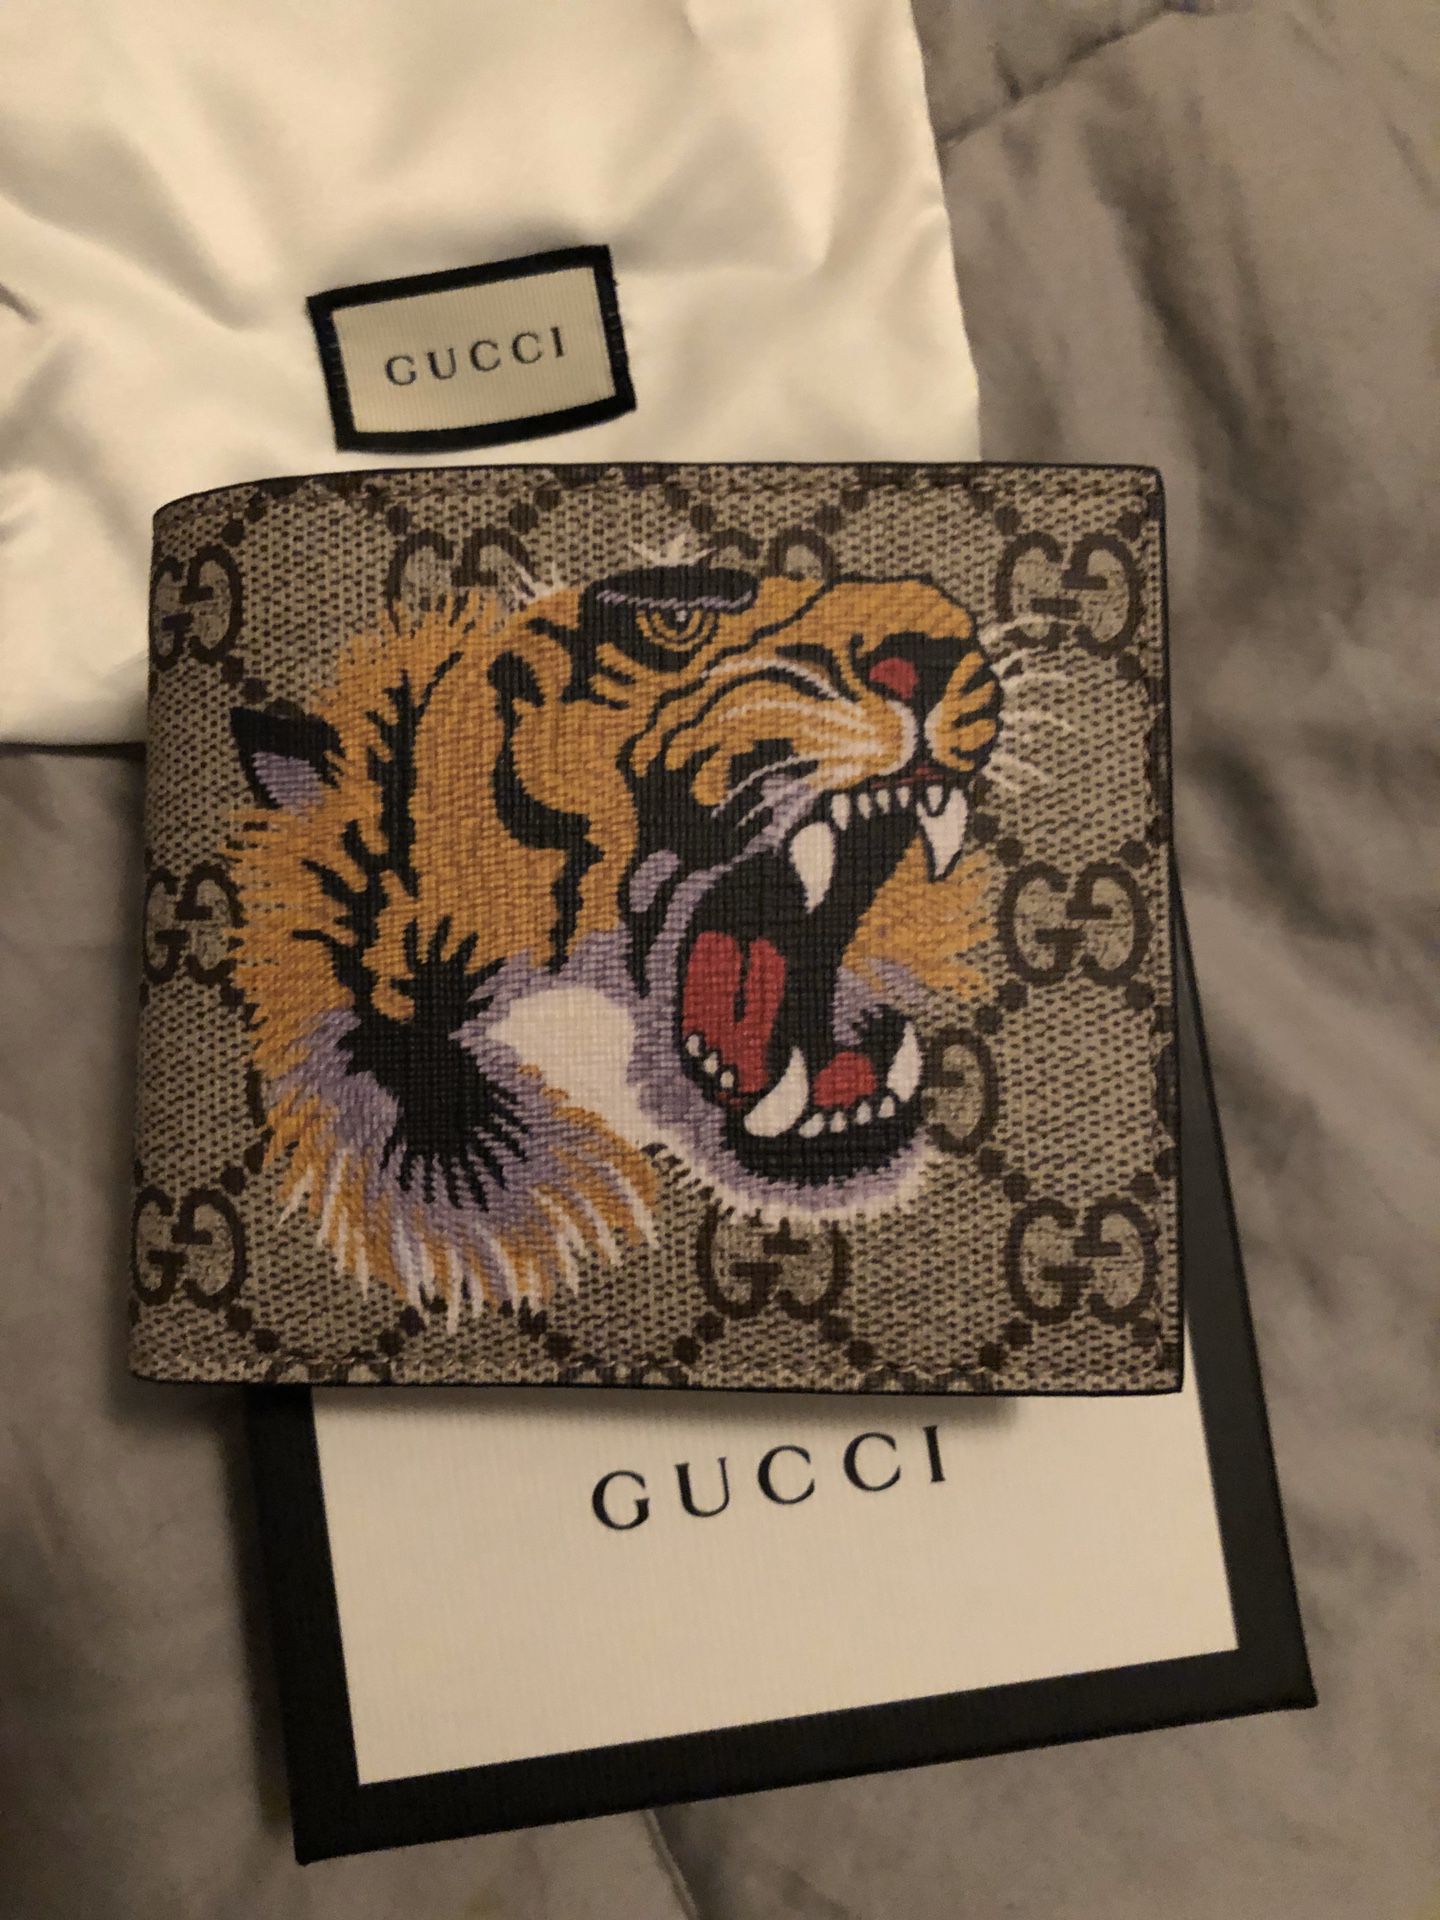 GUCCI wallet. New with tags.